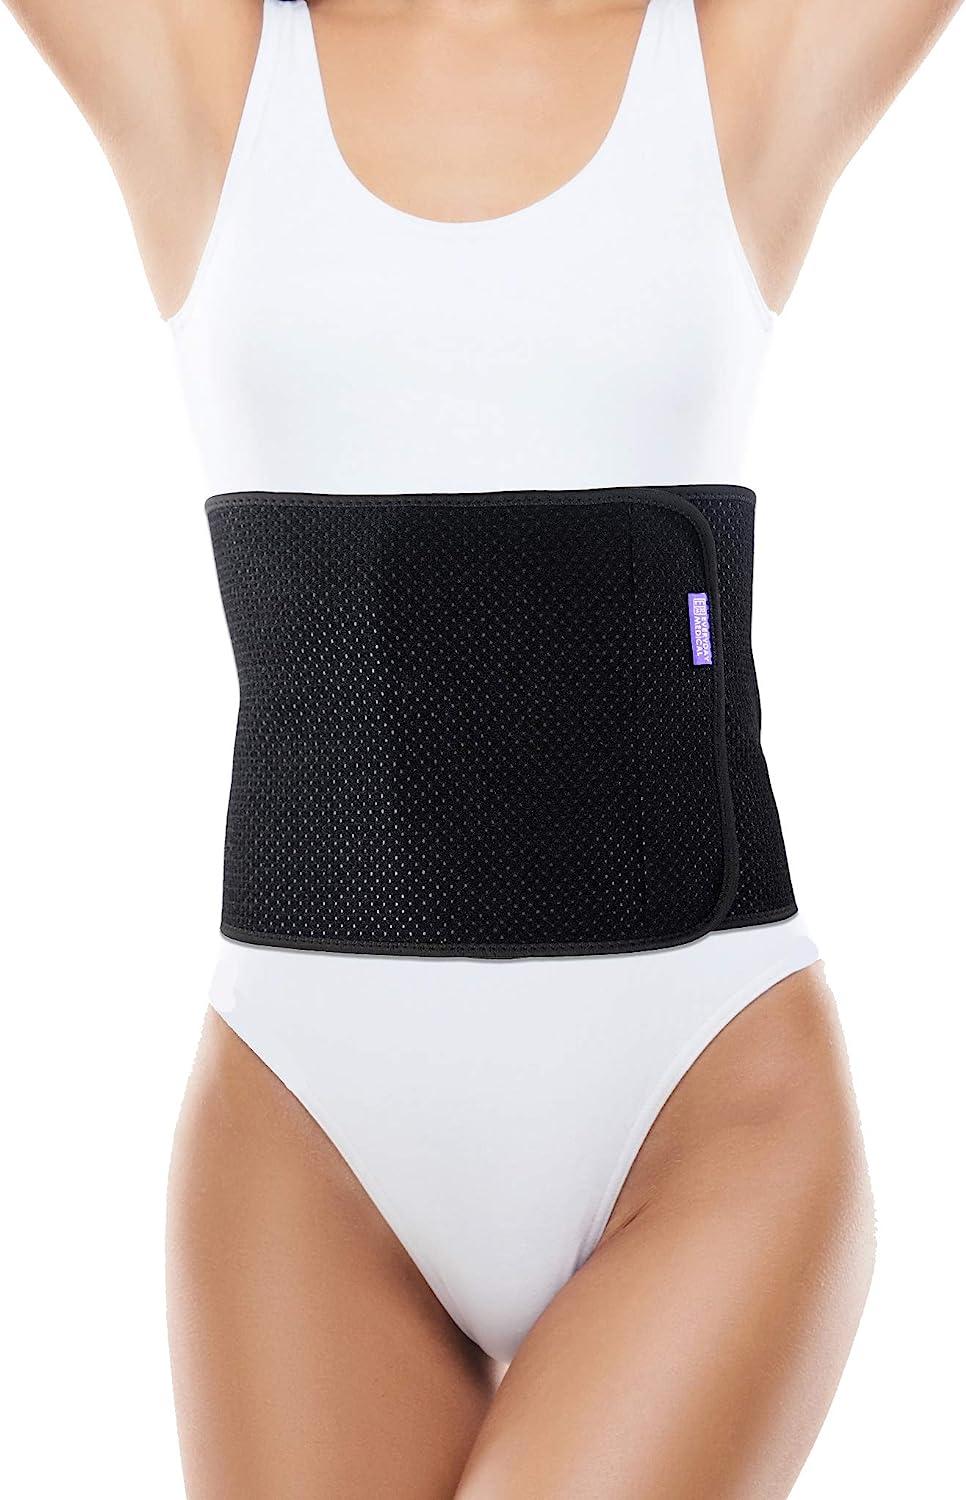 Everyday Medical Abdominal Binder Post Surgery - with Bamboo Charcoal  Accelerate Healing and Reduce Swelling After C-Section, Abdomen Surgeries, Tummy  Tuck, Bladder & Gastric Bypass Belly Girdle Small/Medium (Pack of 1)